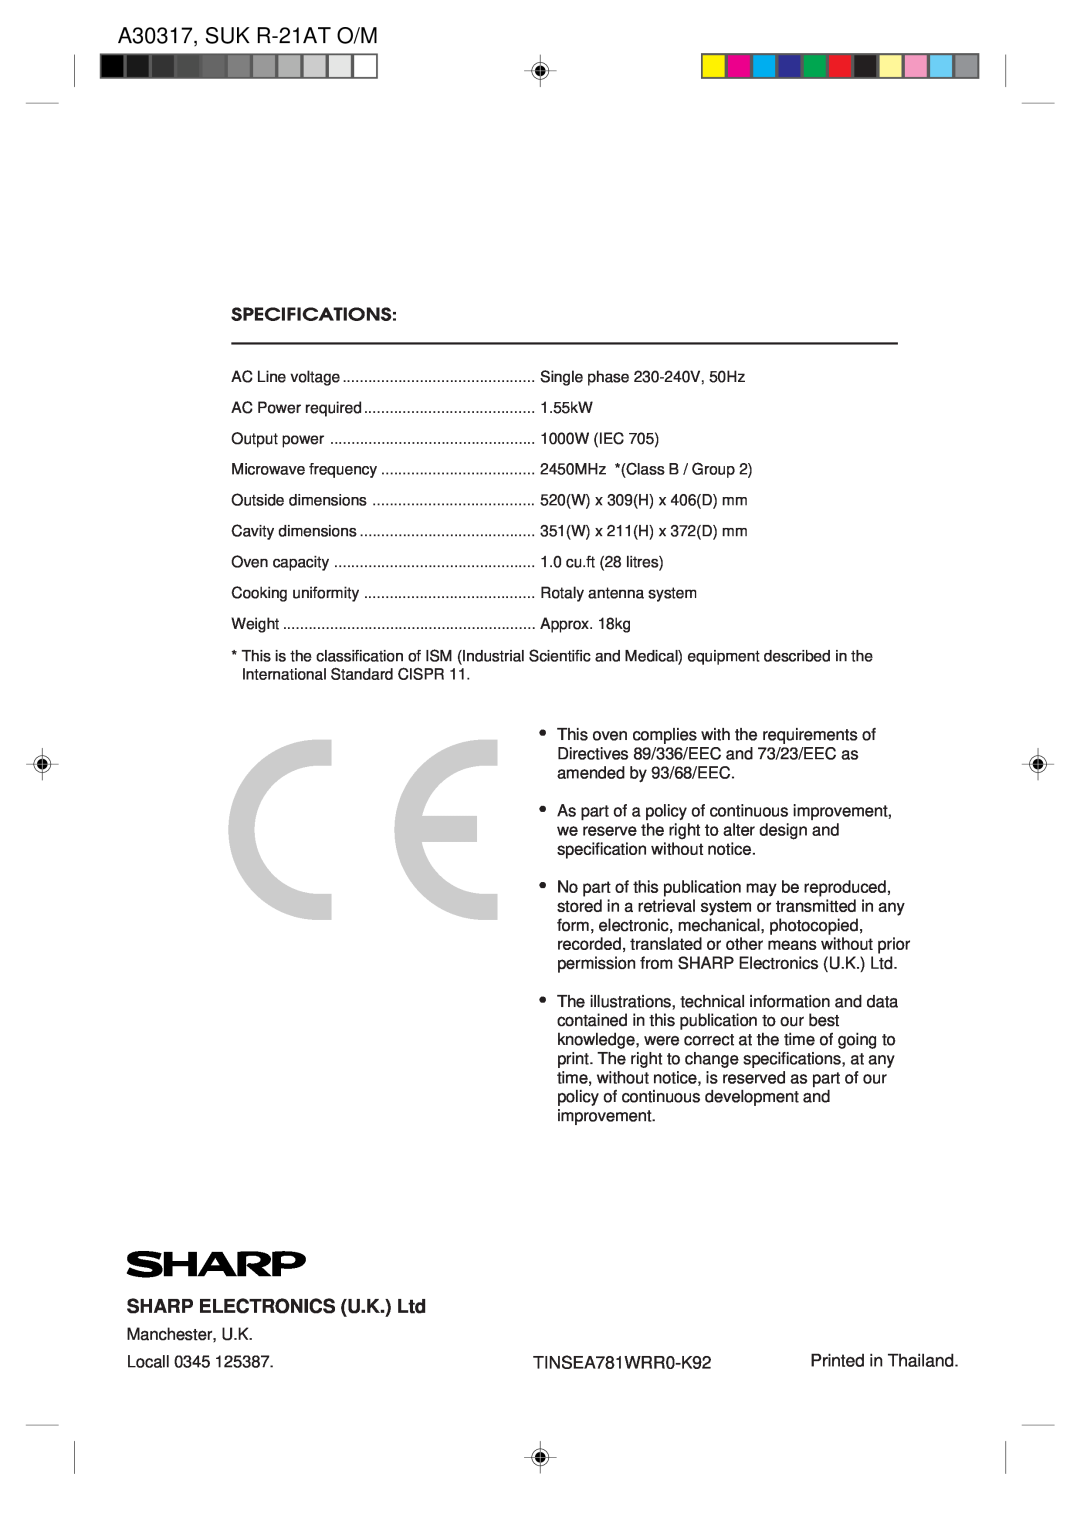 Sharp operation manual Specifications, TINSEA781WRR0-K92, A30317, SUK R-21AT O/M 